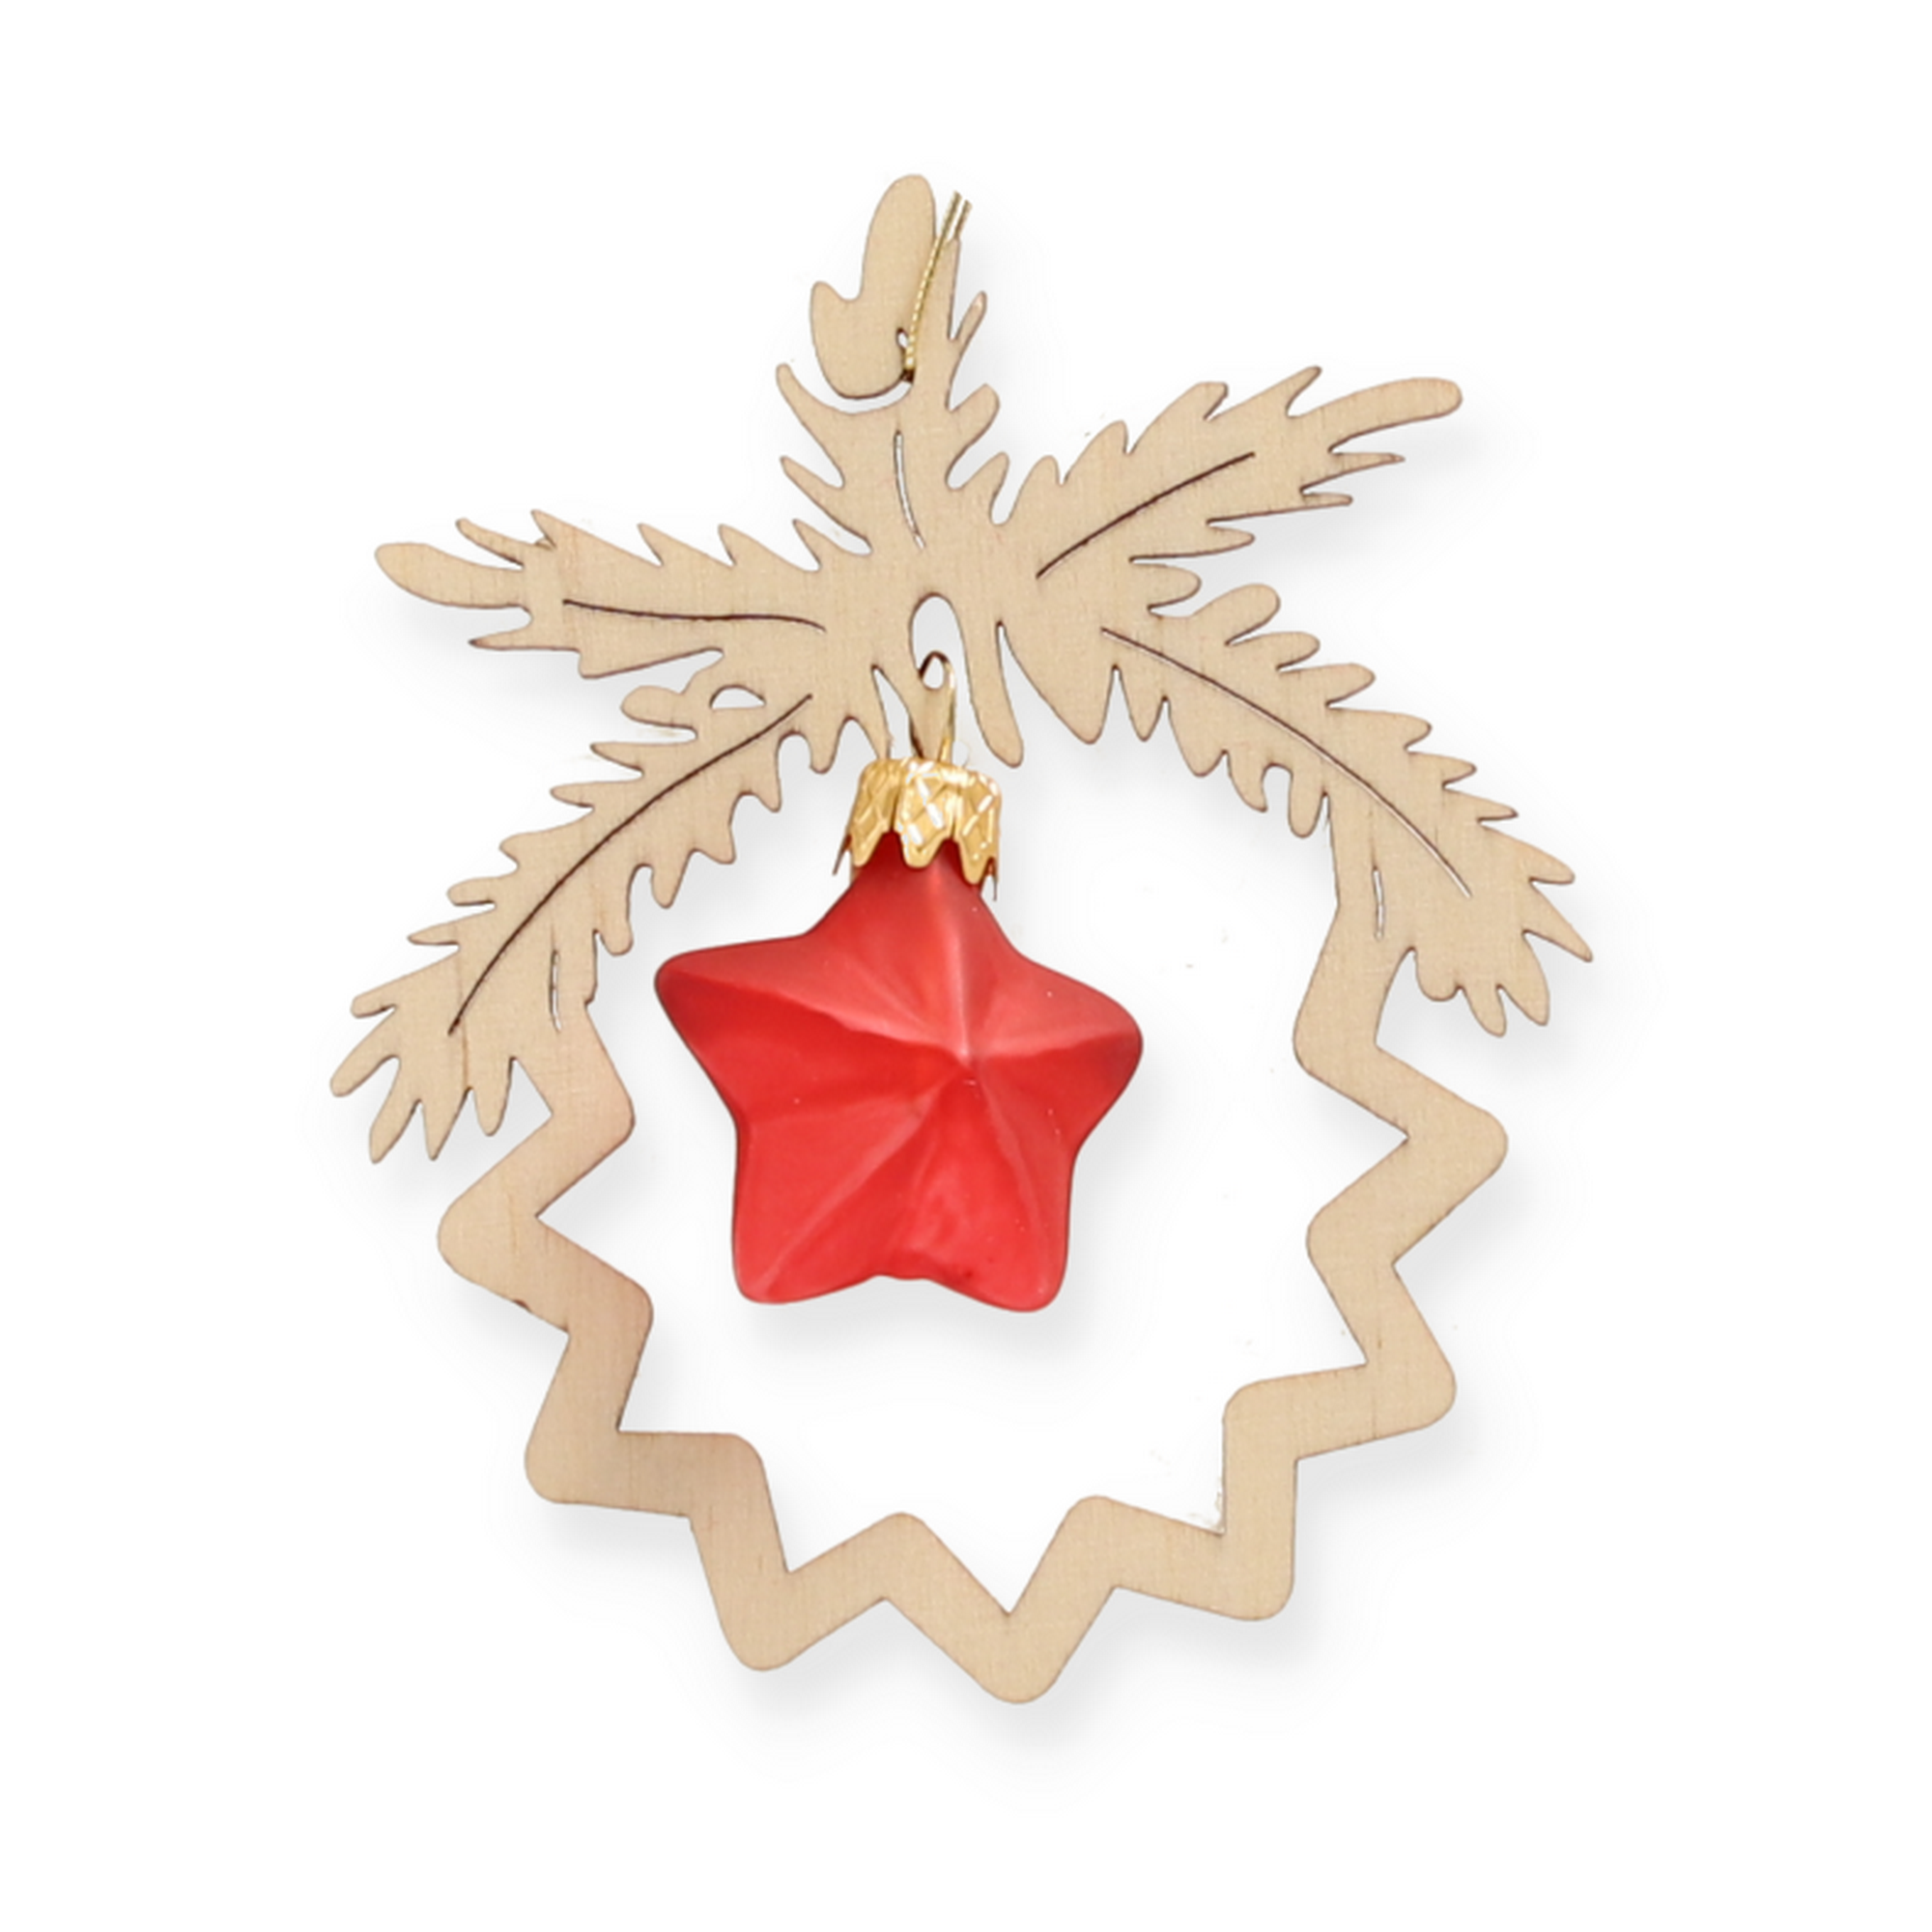 Christbaumschmuck Stern natur/rot Ø 8,5 cm + product picture